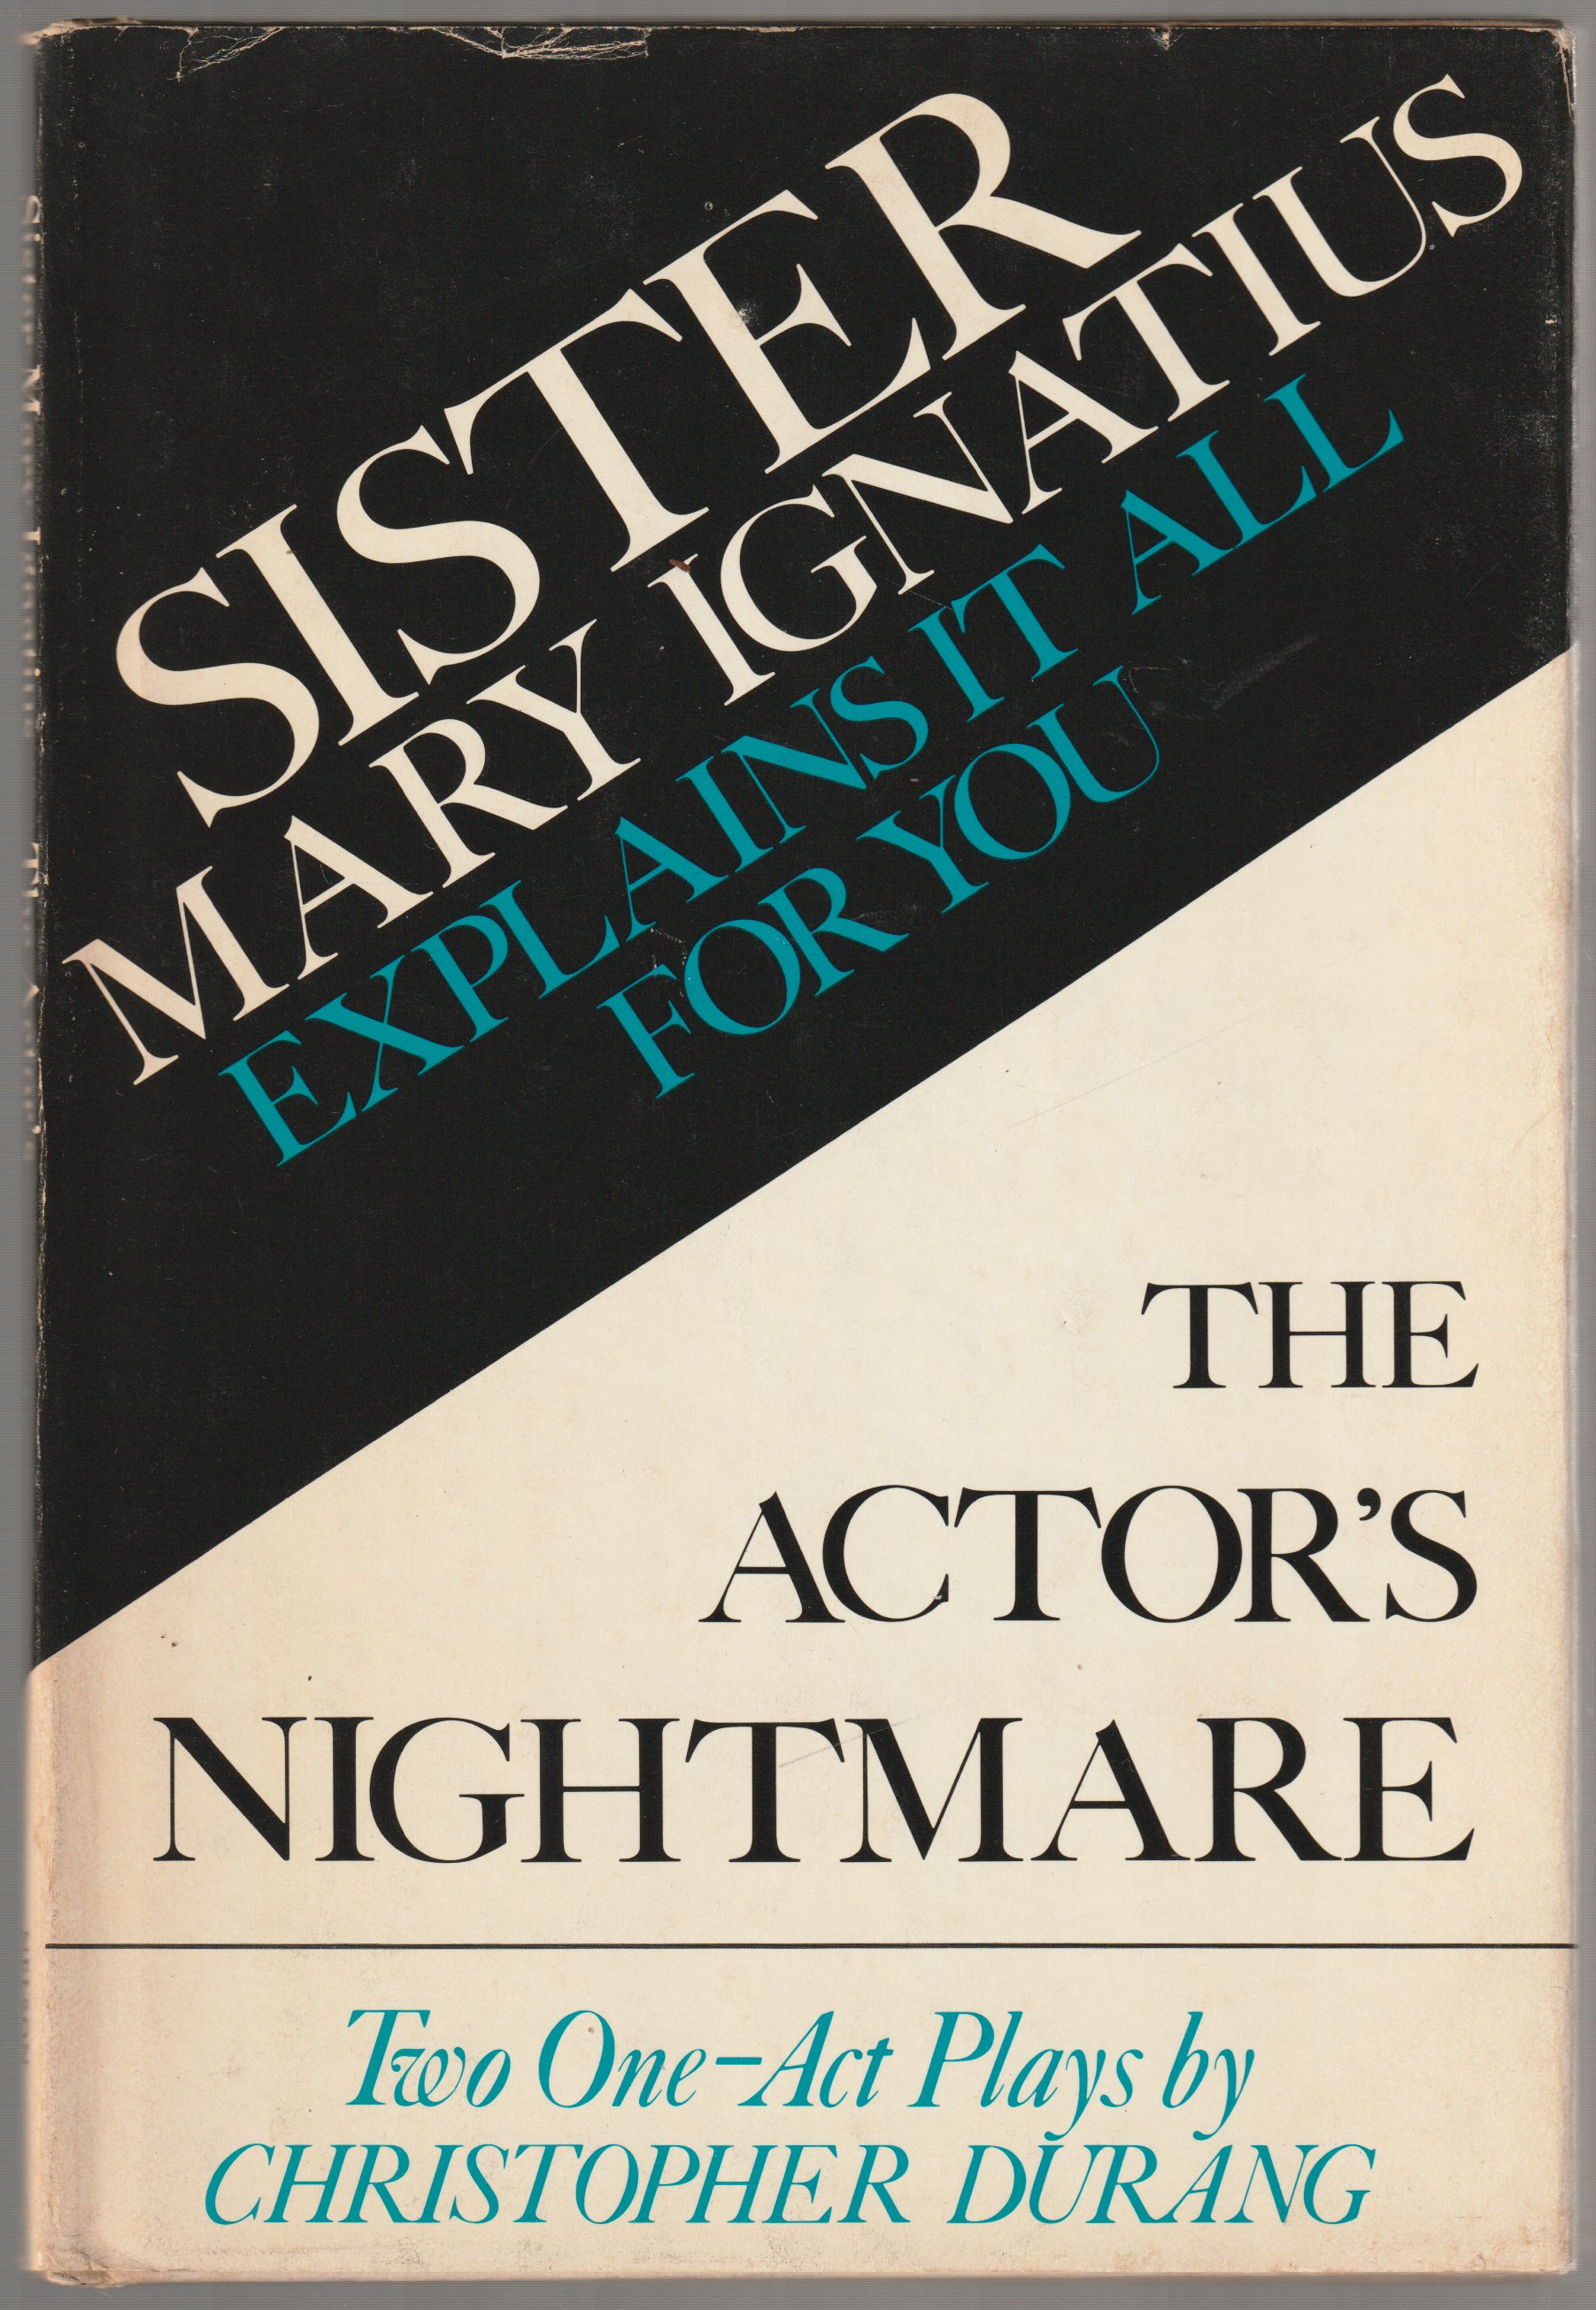 Sister Mary Ignatius explains it all for you ; The actor's nightmare : two one-act plays.